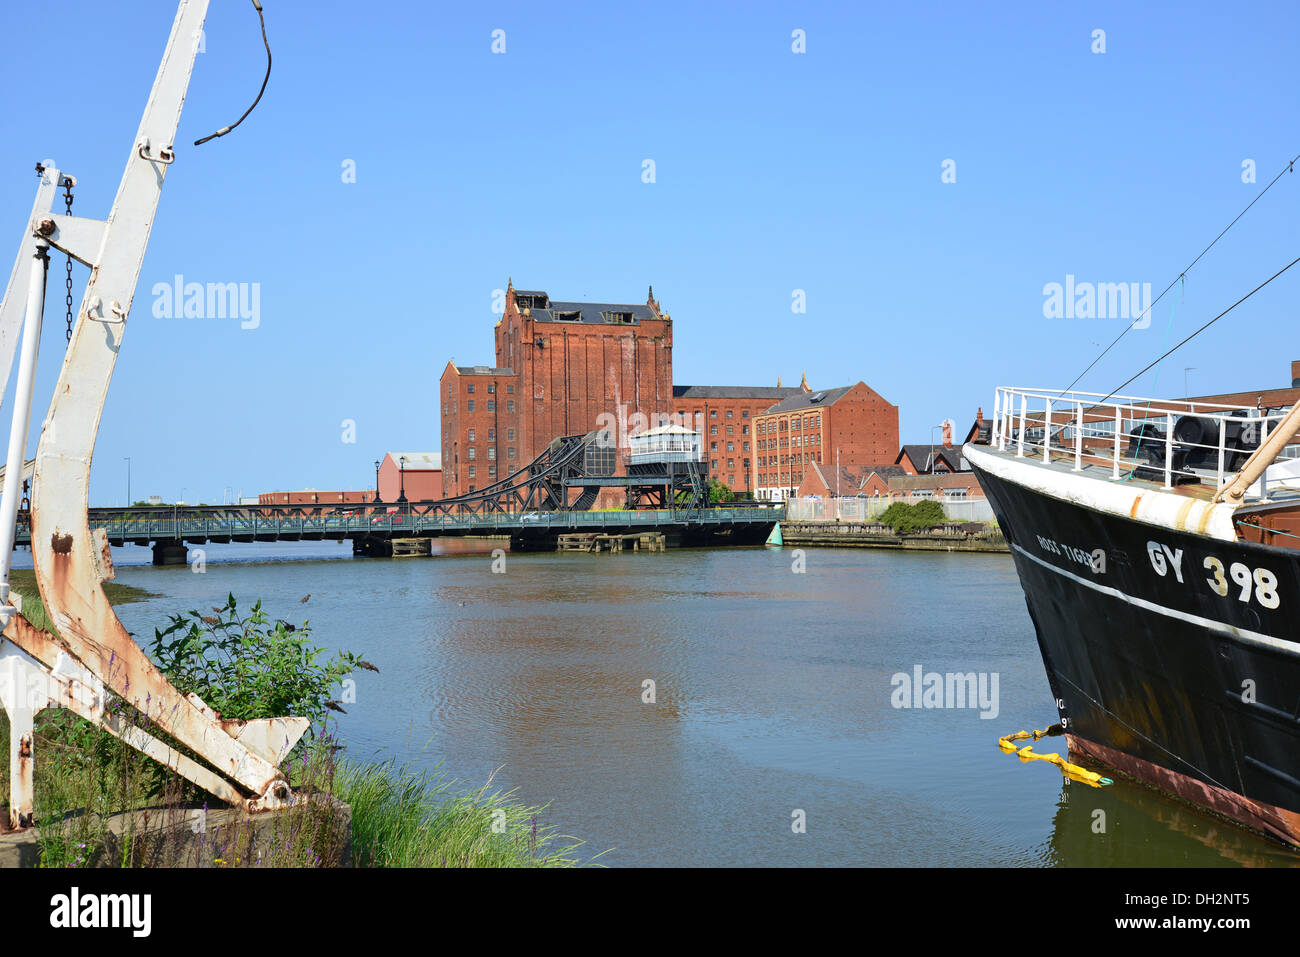 Alexander Dock à Grimsby Docks, Grimsby, Lincolnshire, Angleterre, Royaume-Uni Banque D'Images